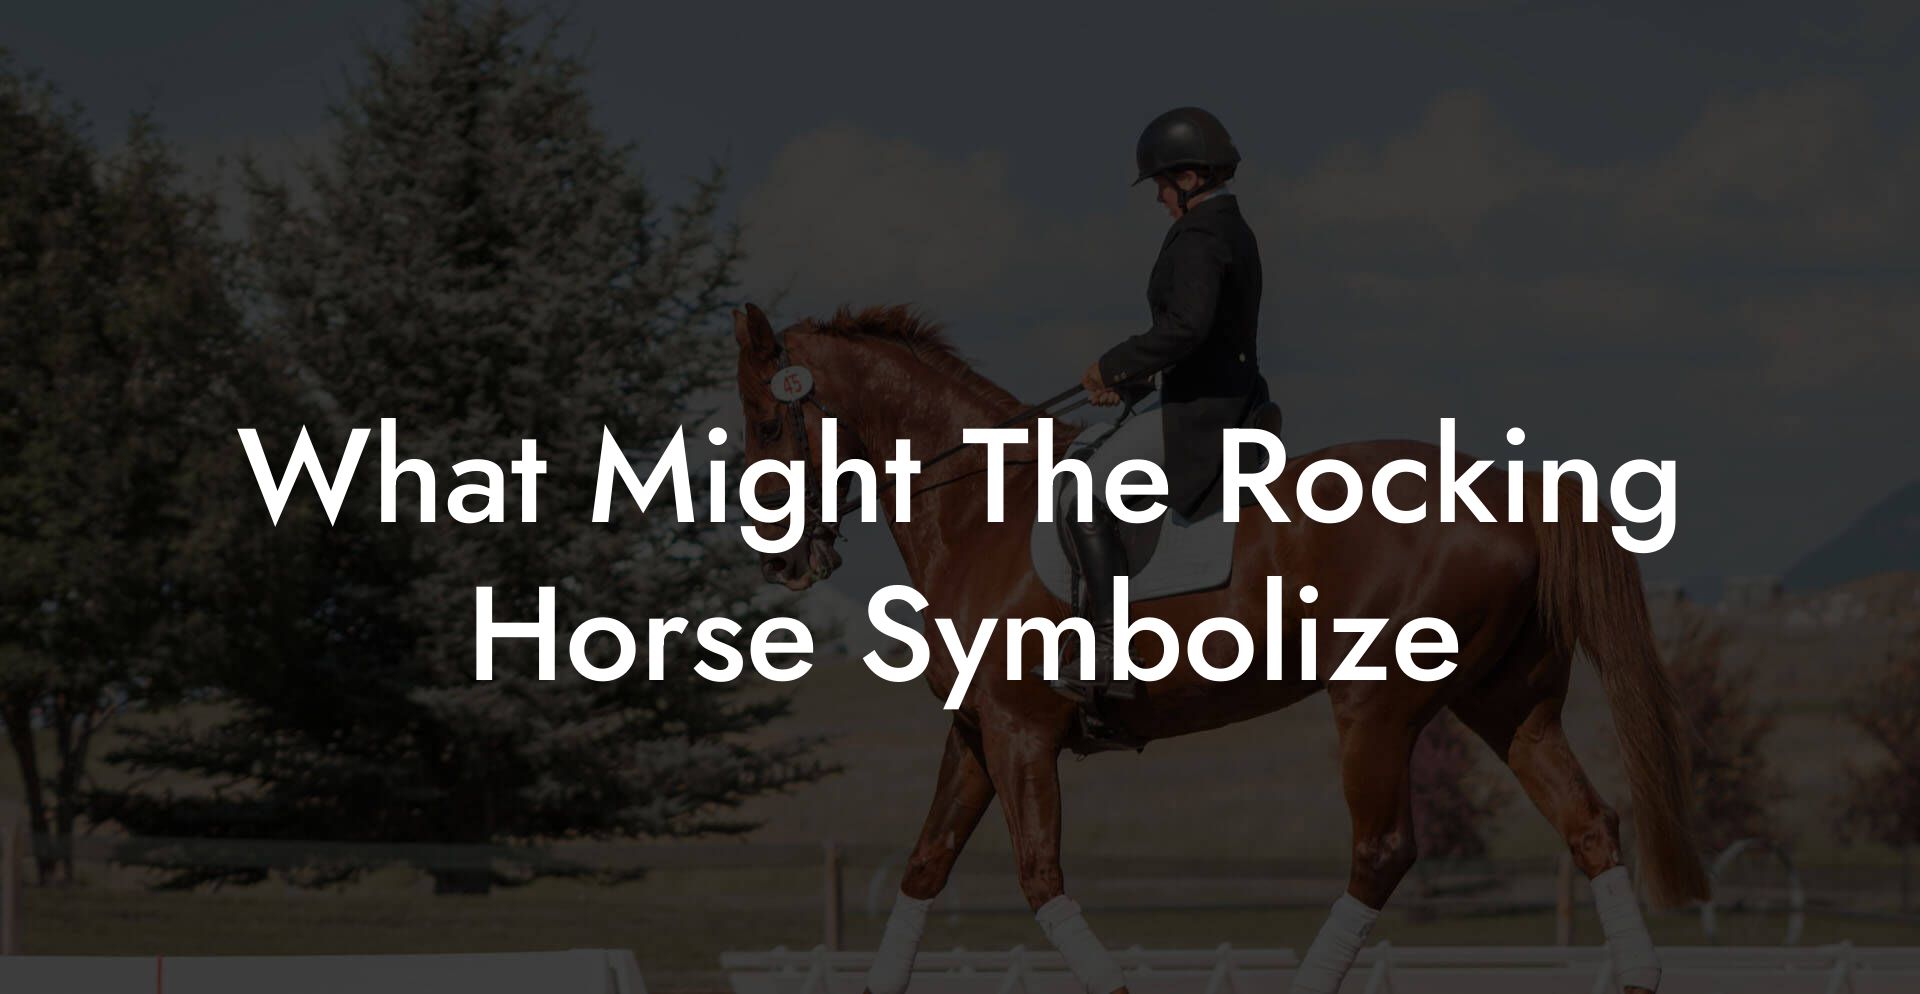 What Might The Rocking Horse Symbolize